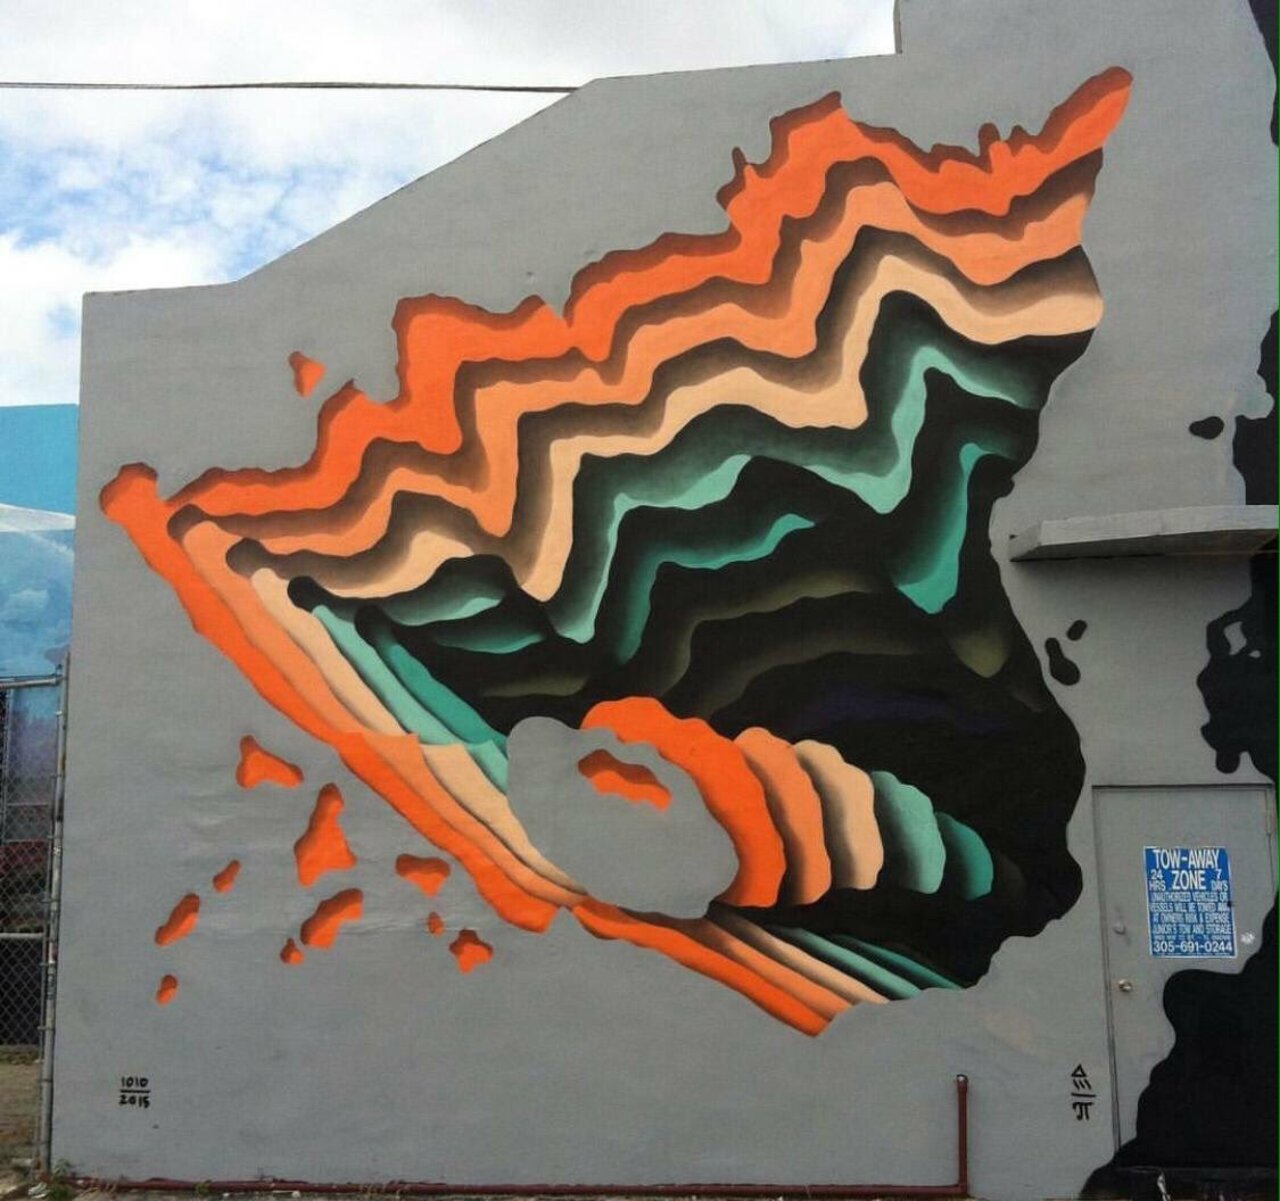 If you give German street artist 1010 an empty wall, he will find a way to create stunning 3D art with an incredible depth perspective. He controls his spray paint method with great mastery for both color & design.  #StreetArt #Graffiti #ArteUrbano #designthinking https://t.co/bOMz6IZh4l